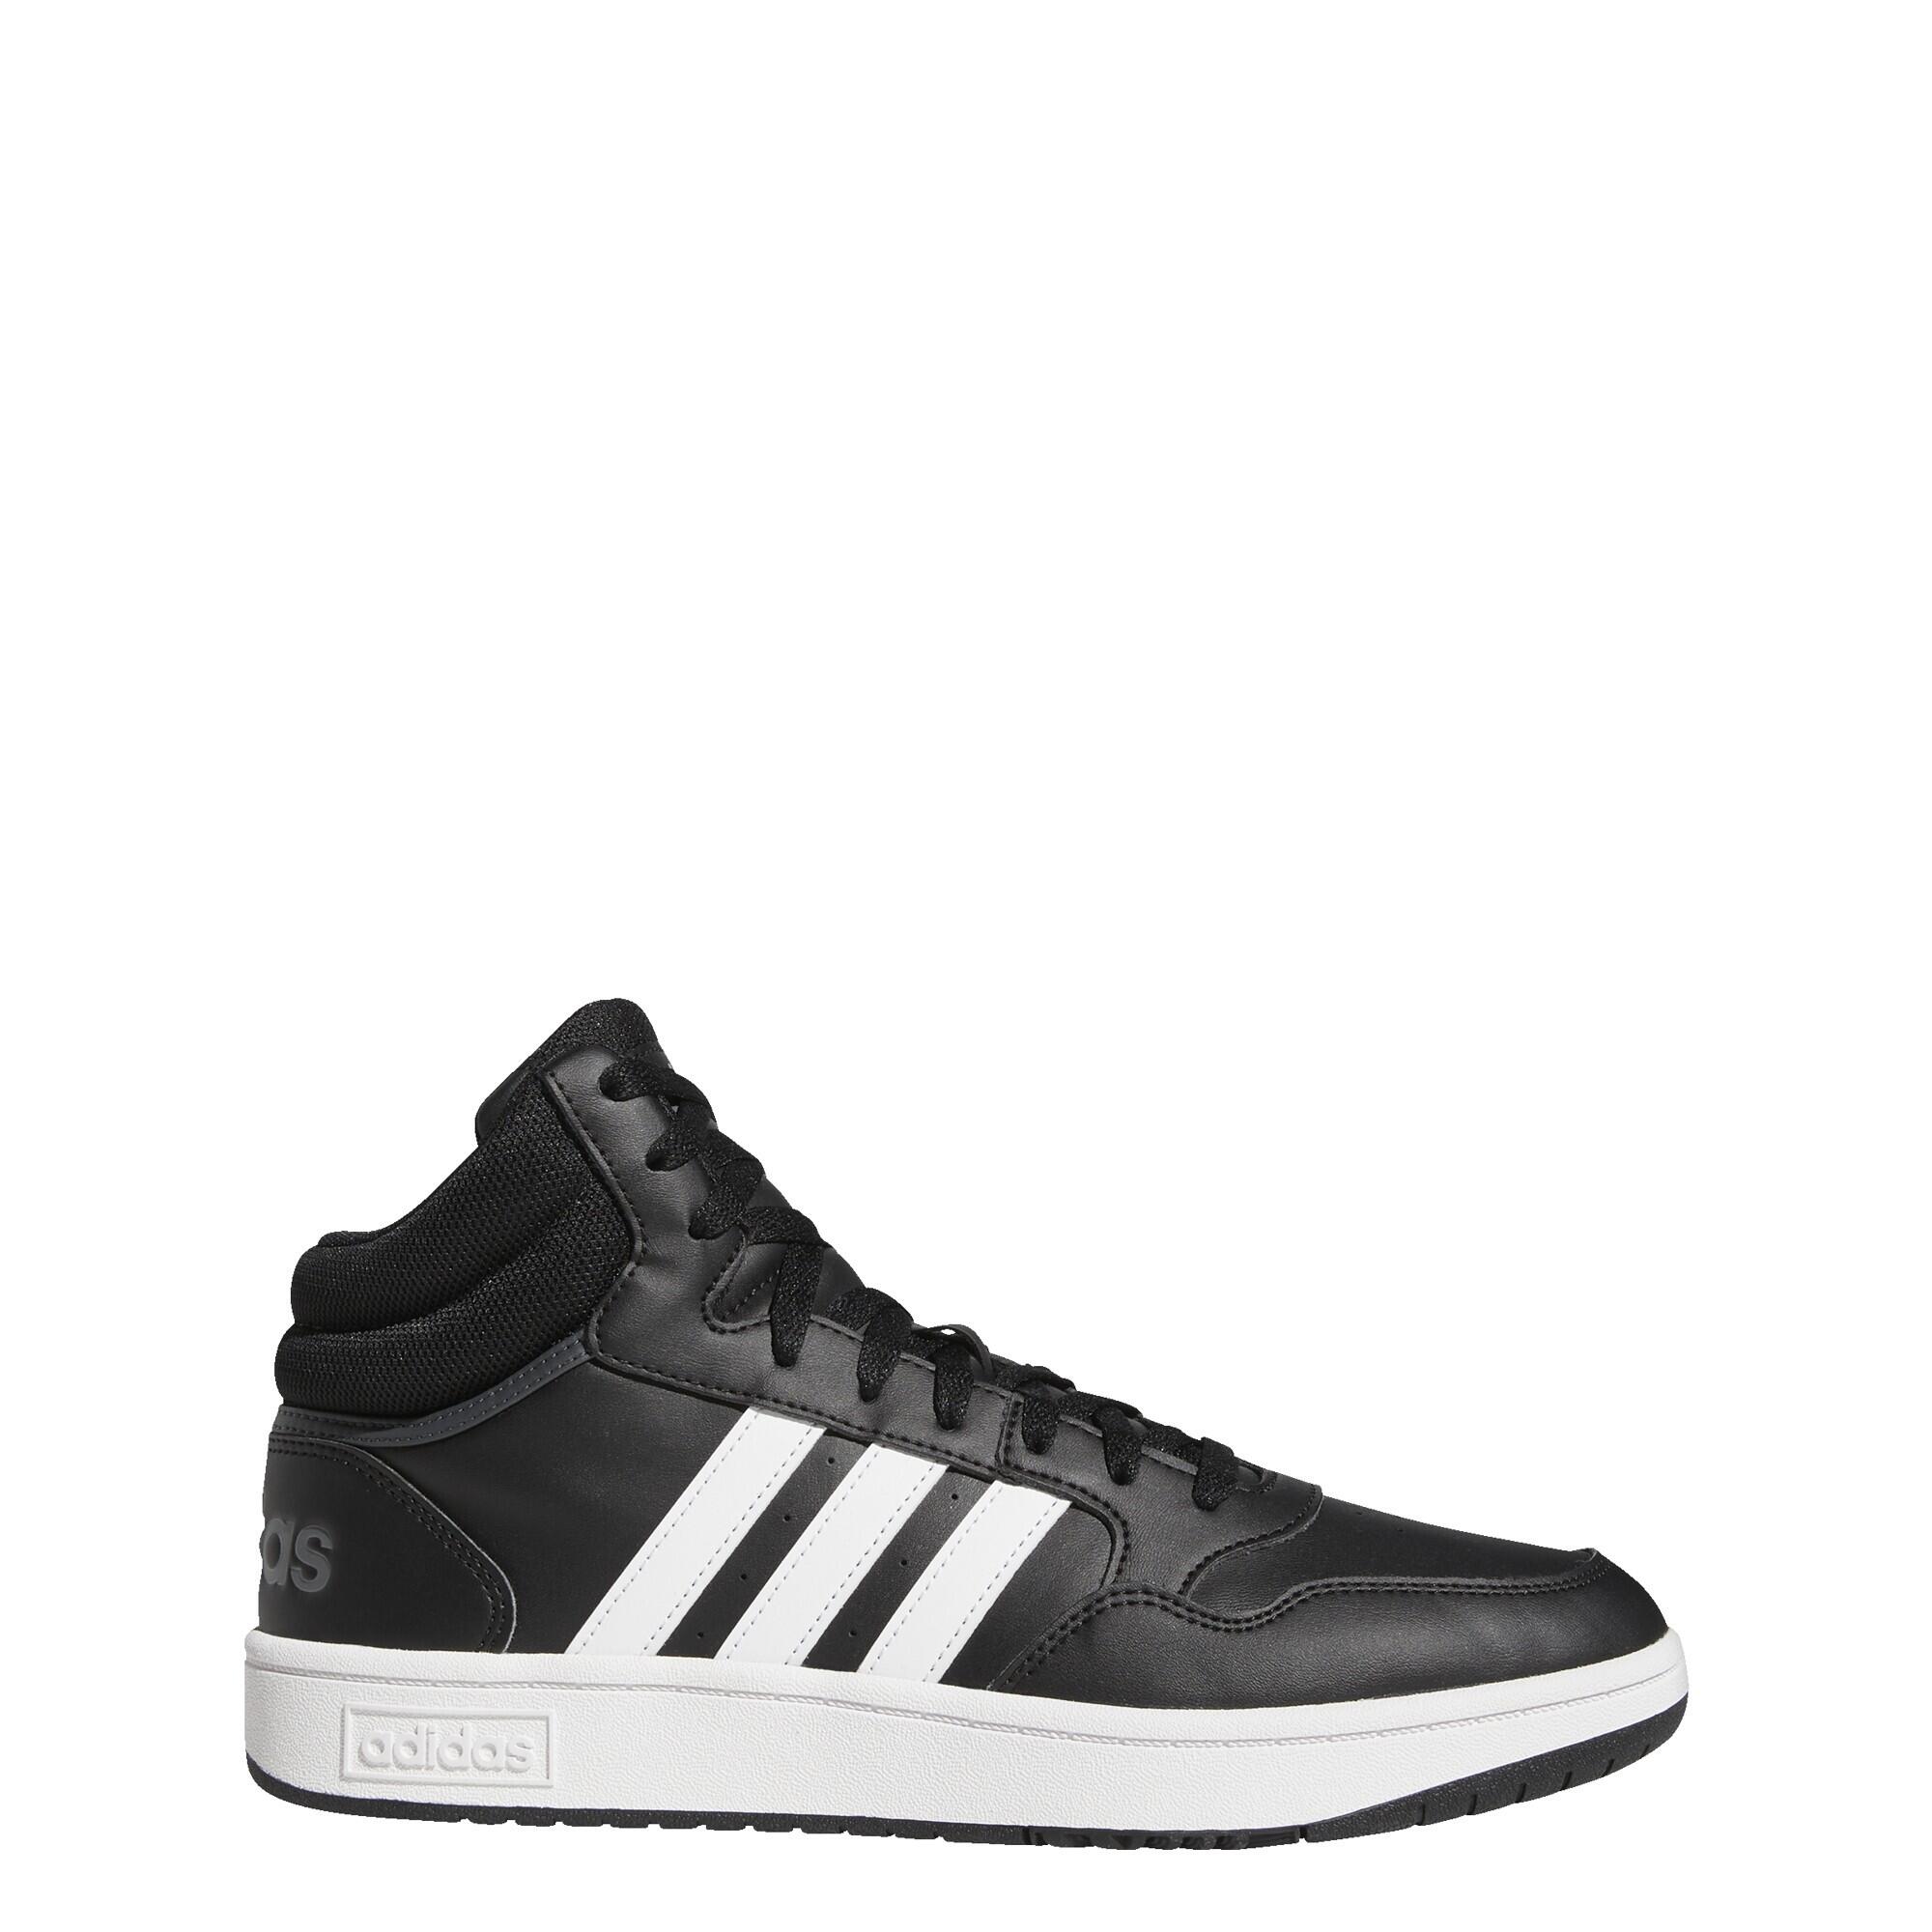 ADIDAS Hoops 3.0 Mid Lifestyle Basketball Classic Vintage Shoes